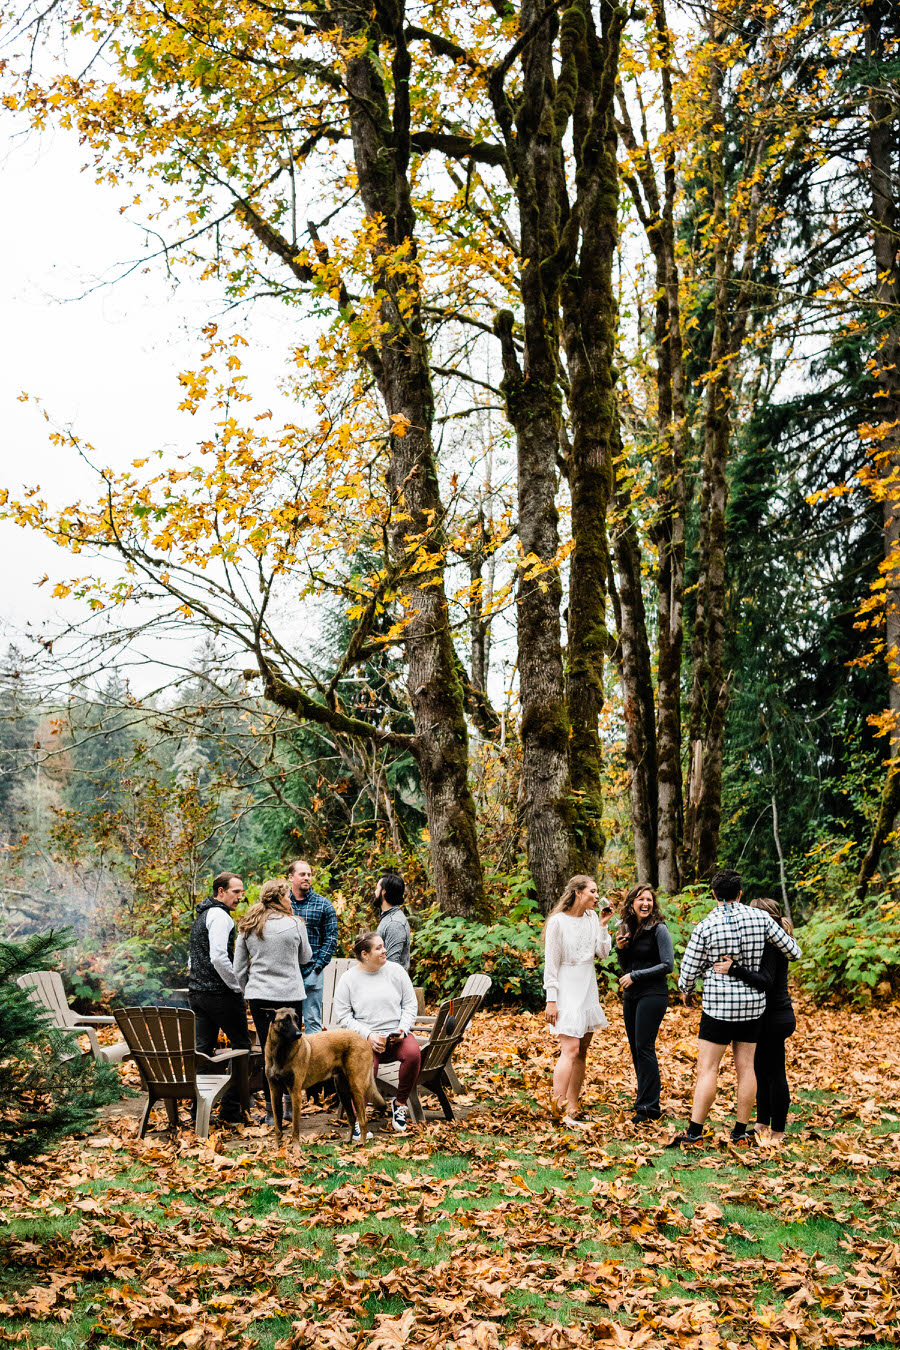 Elopement guests enjoy socializing by an outdoor fire pit in the fall